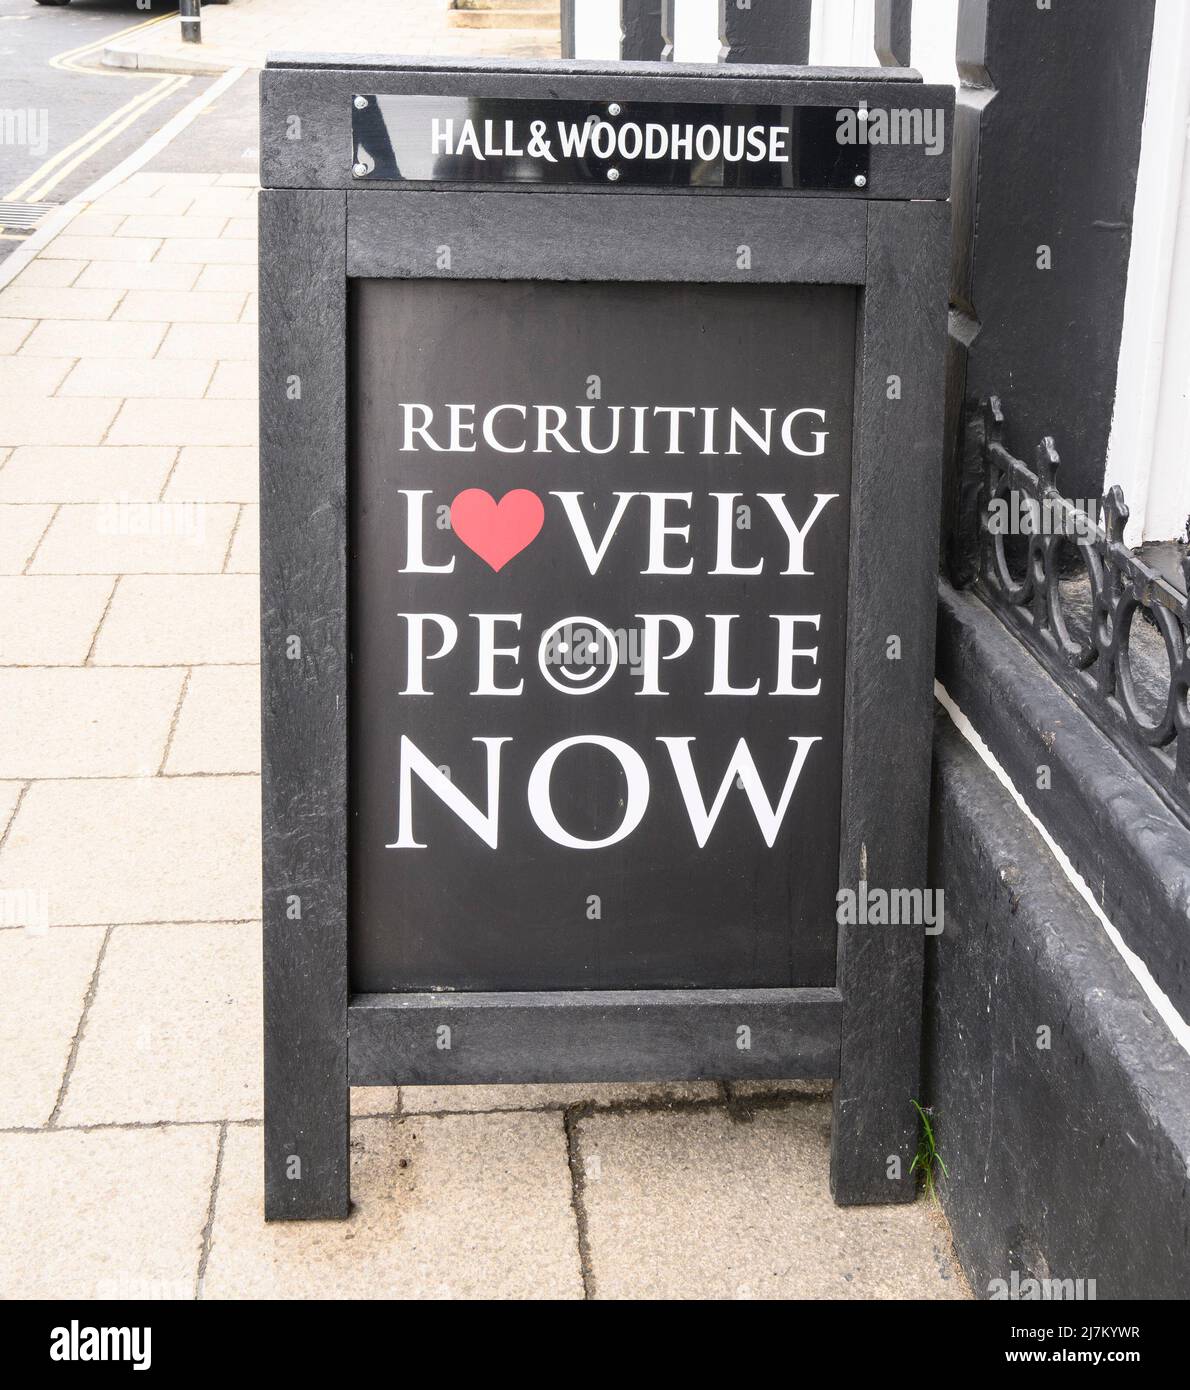 Lyme Regis, Dorset, UK. 10th May 2022. UK News; Cost of Living: Hospitality businesses and small shops in many of England's coastal resorts are struggling to recruit staff for the holiday season. Pictured is an example of the many 'staff wanted' notices currently being displayed in the windows of local business in the small seaside town of Lyme Regis, Dorset. It is has been speculated locally that the high cost of housing in the town, poor public transport links, and the recent prohibitive hikes in the cost of parking may be factors contributing to the staff shortage. Credit: Celia McMahon/ Stock Photo